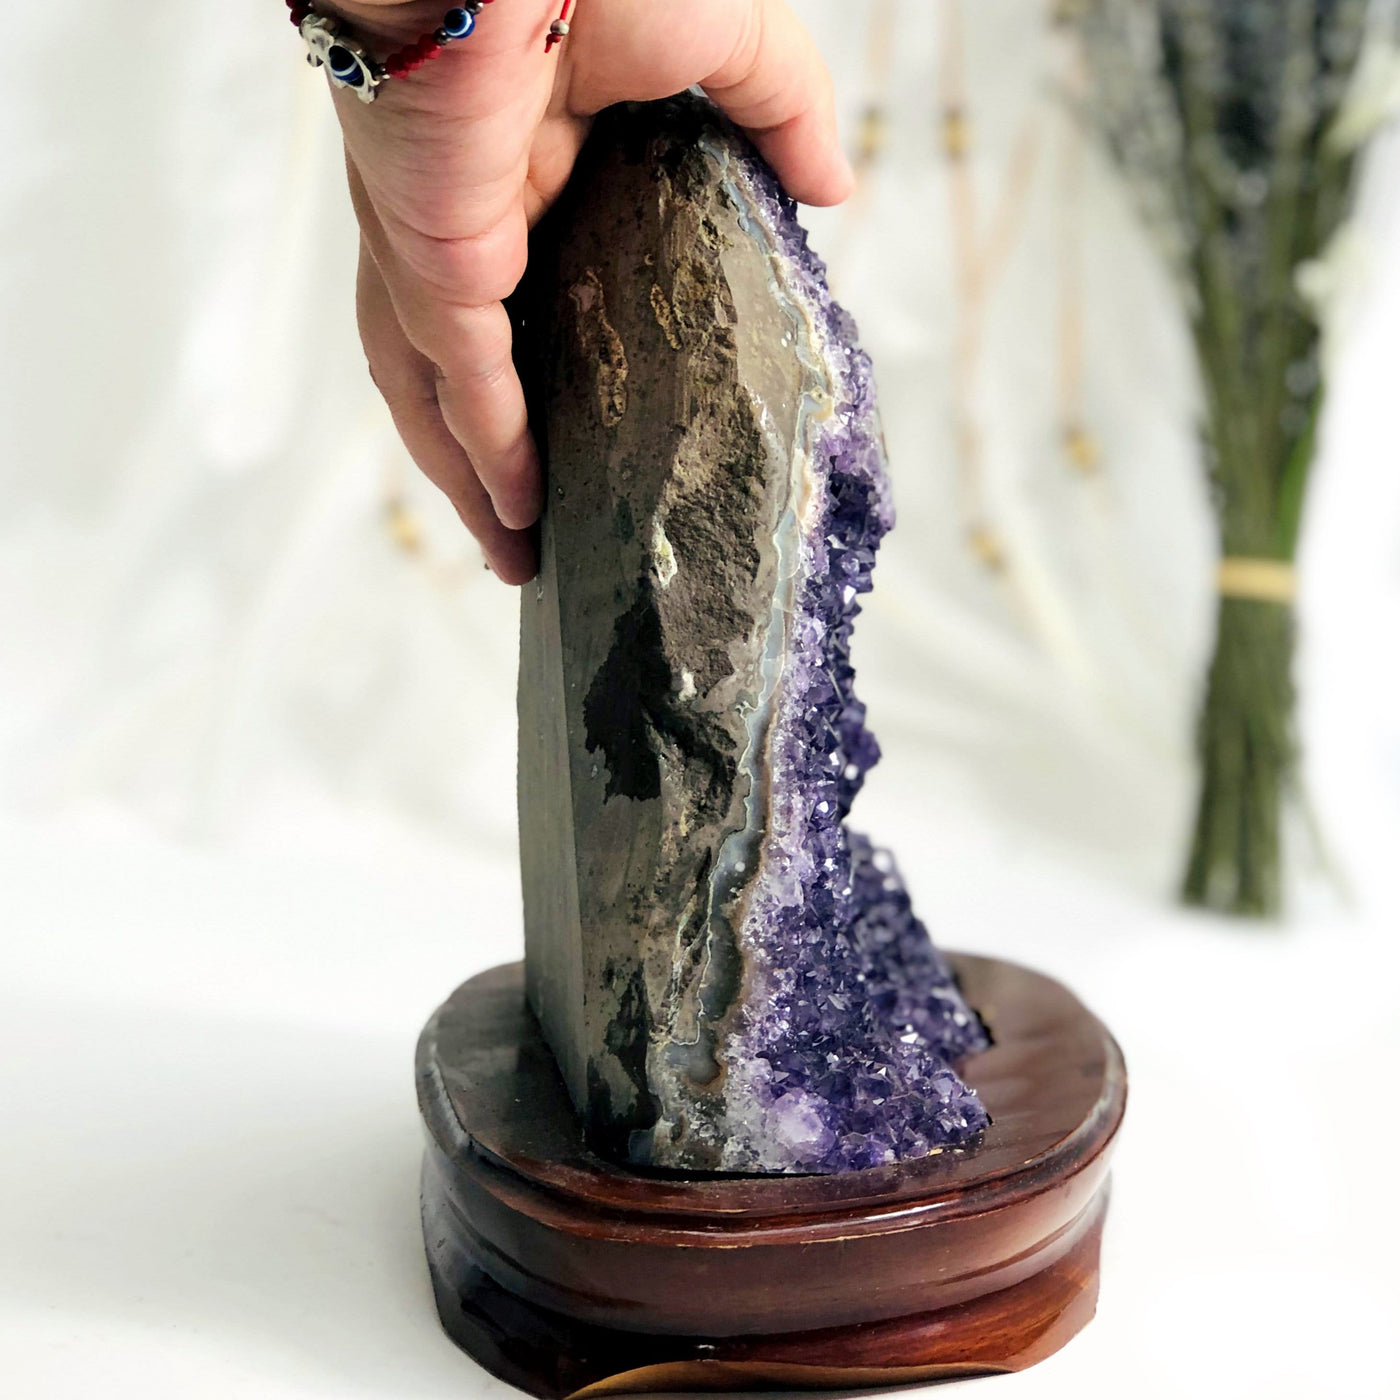 hand showing side view of Amethyst Cluster on Wooden Base with decorations in the background